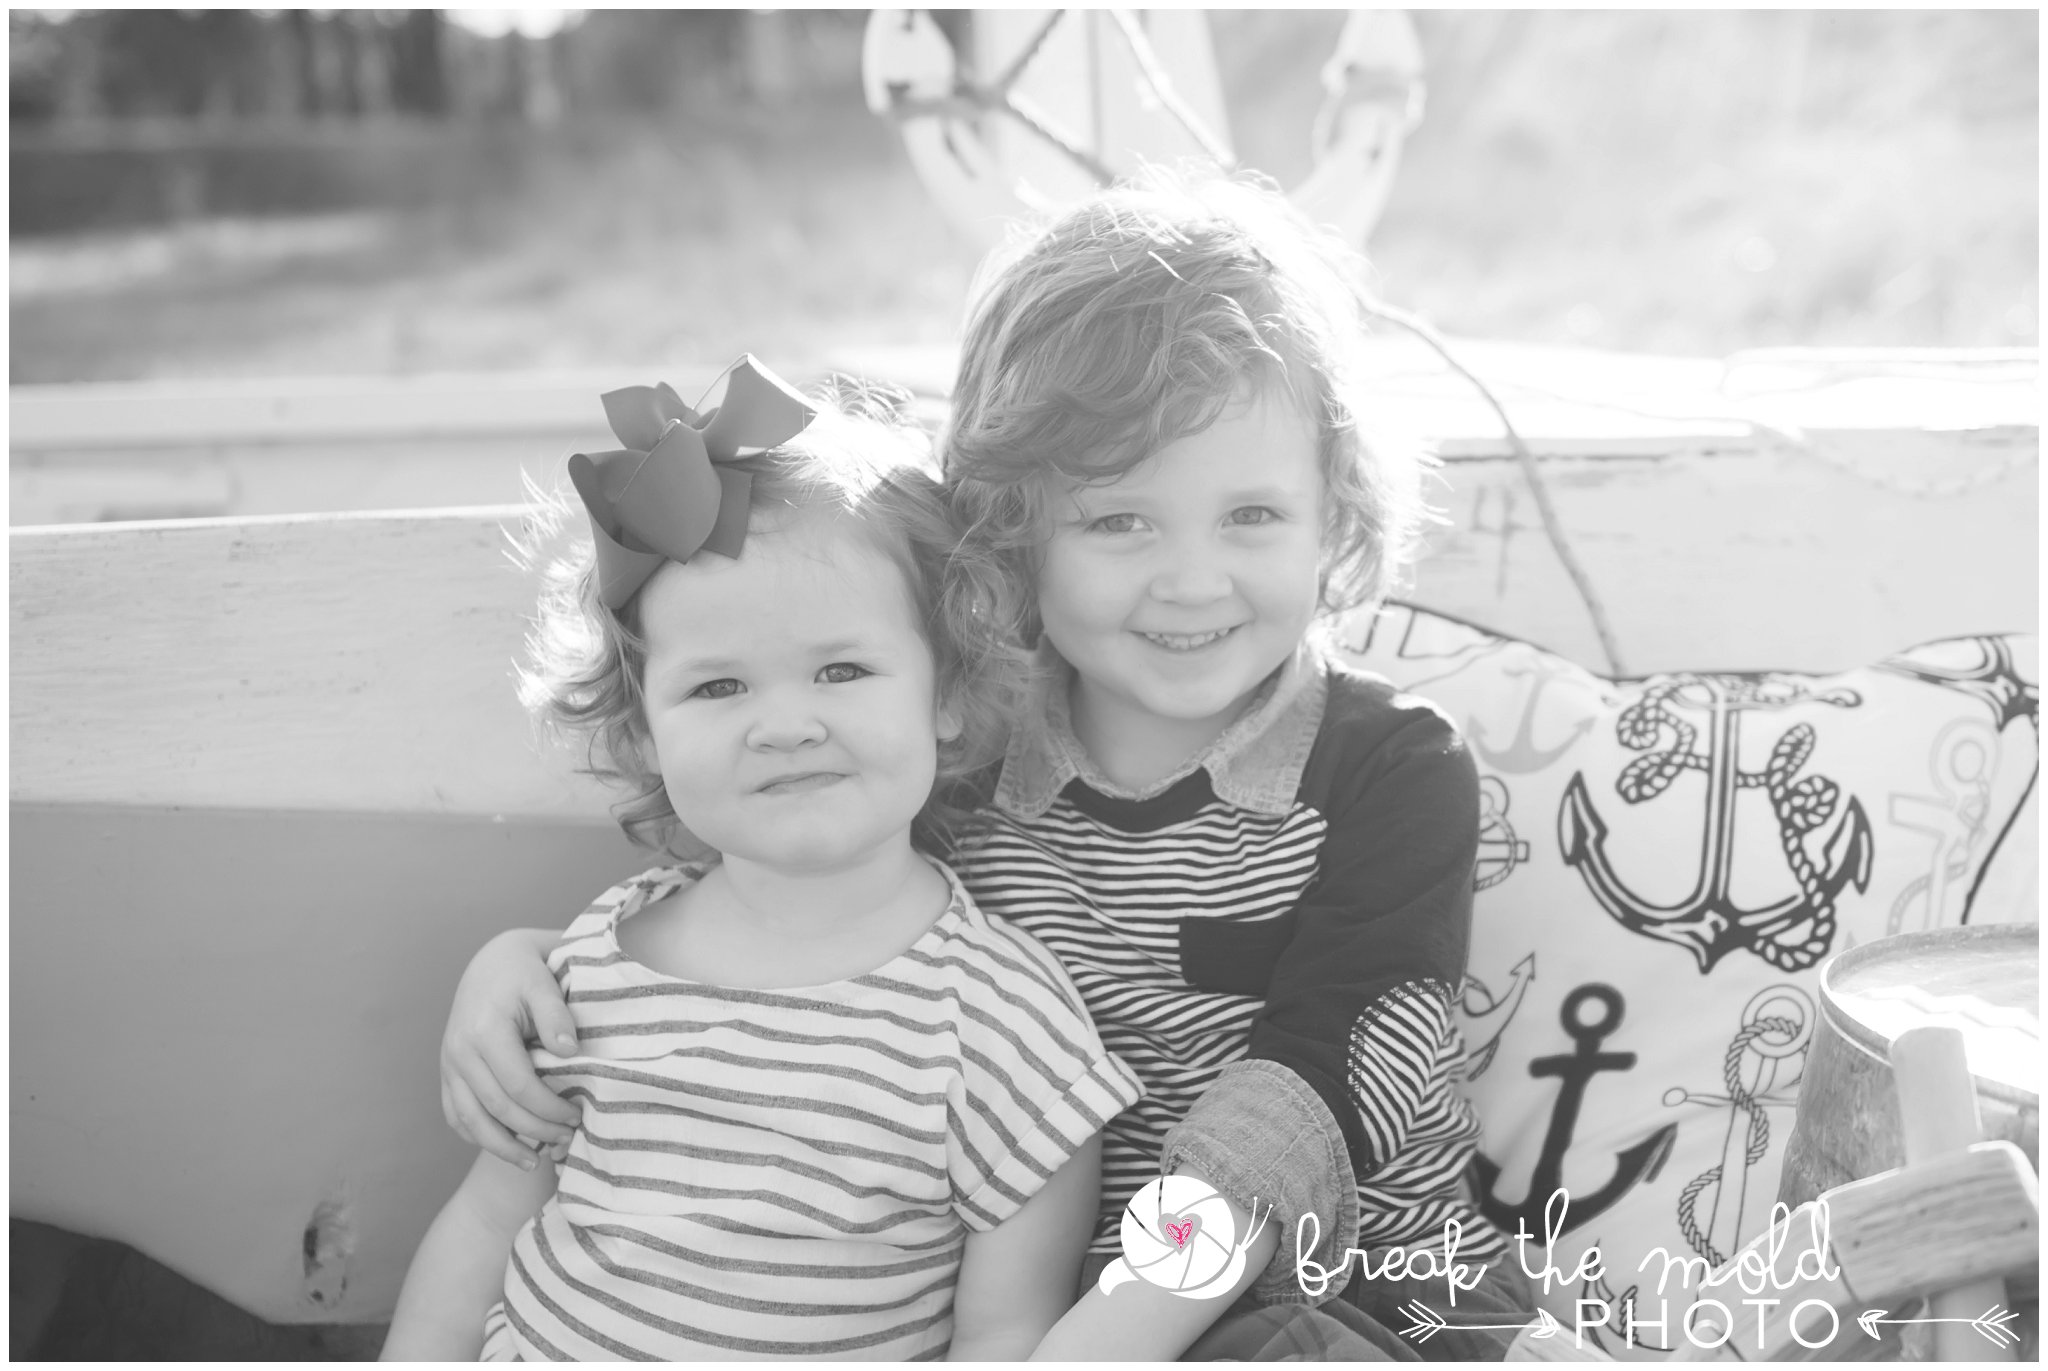 break-the-mold-photo-nautical-themed-mini-sessions-knoxville_3890.jpg